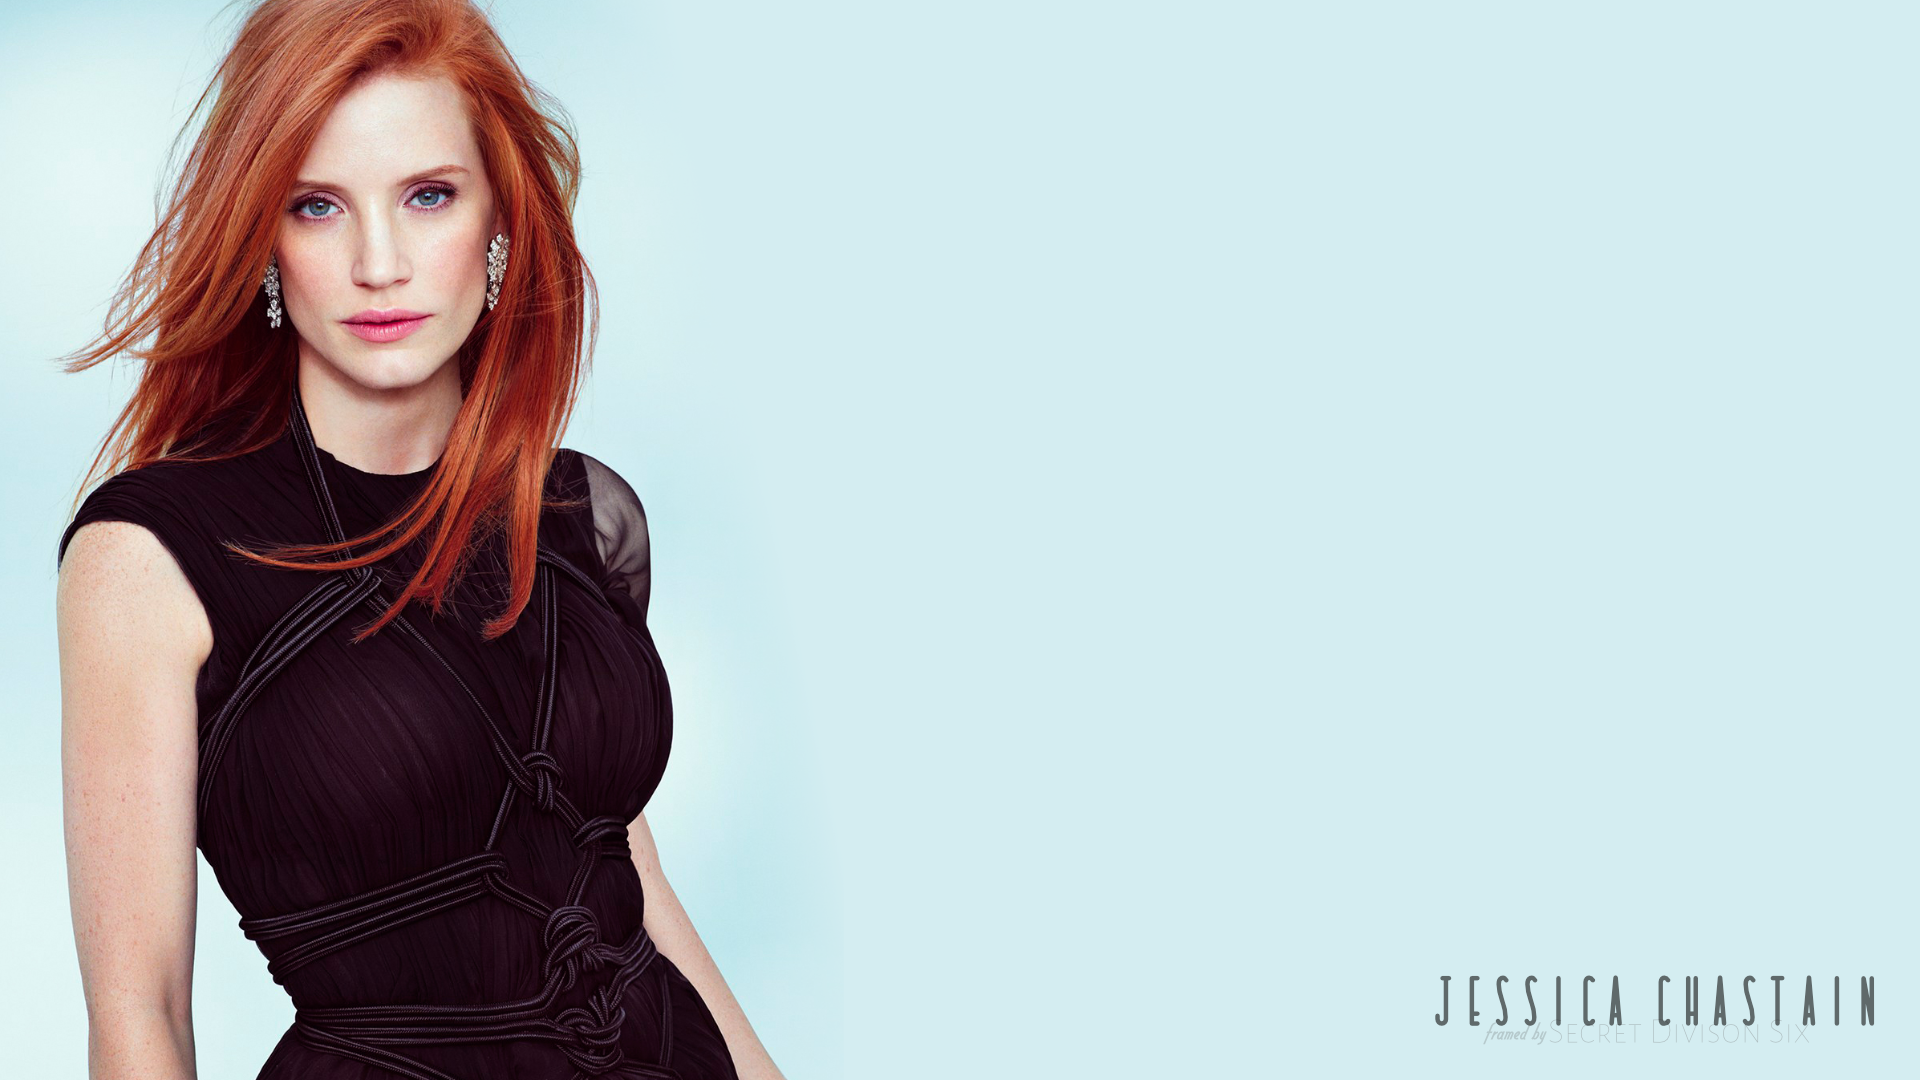 Jessica Chastain Redhead Actor Actress Simple Background Women 1920x1080